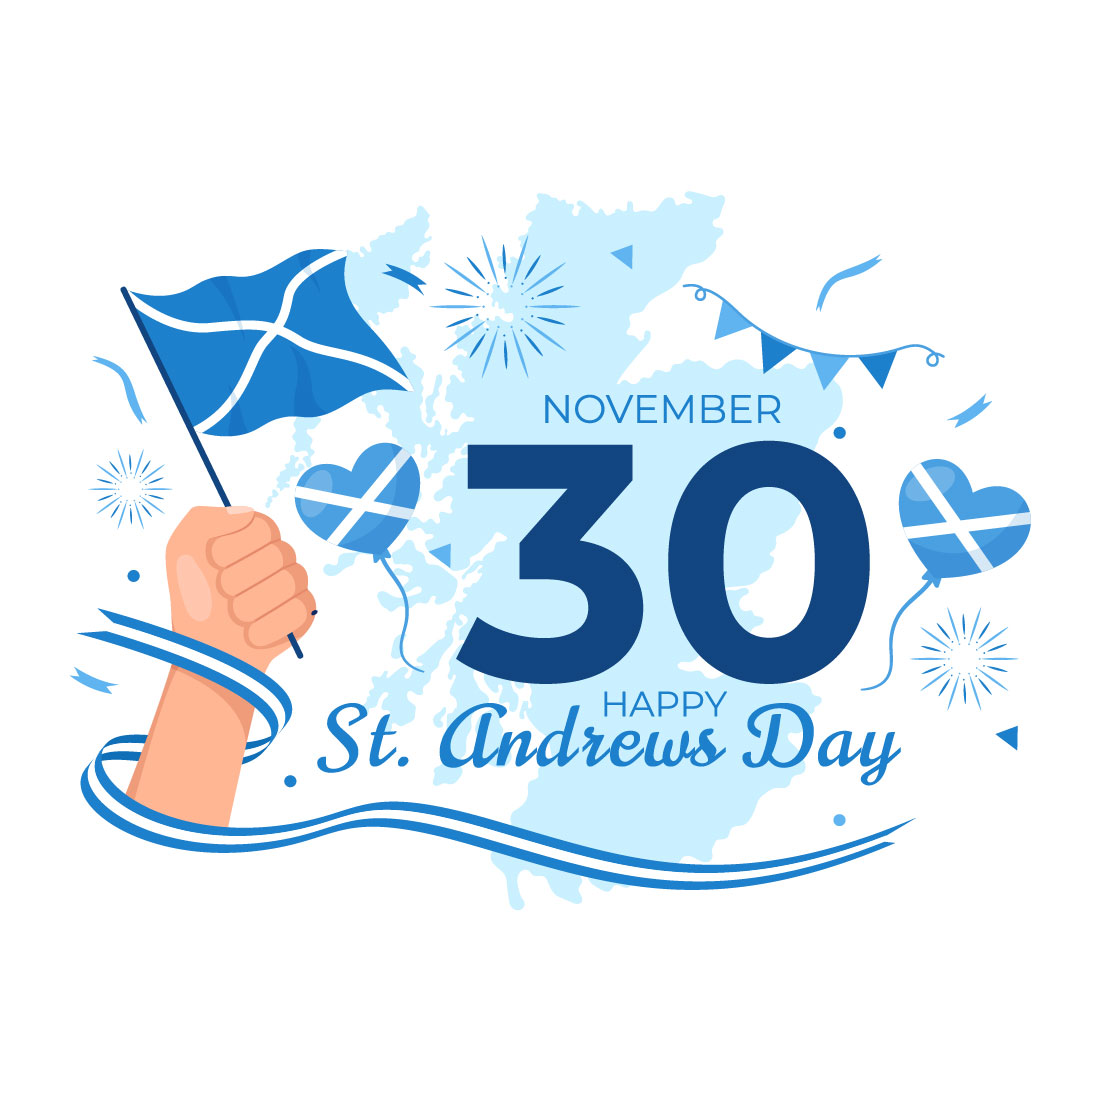 12 St Andrew Day Illustration cover image.